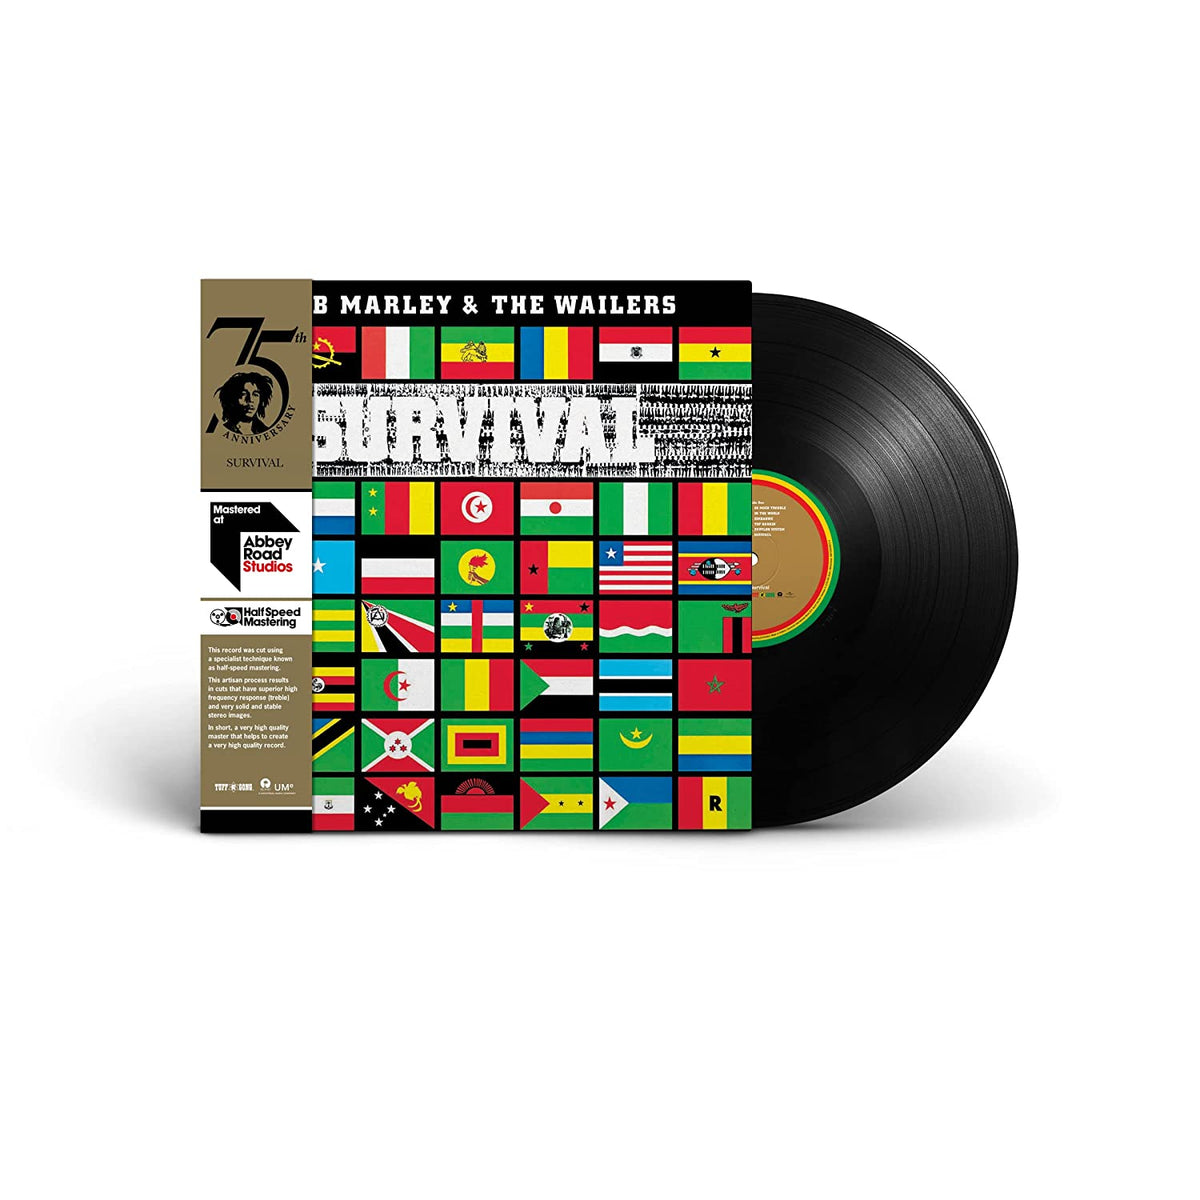 Bob Marley & The Wailers - Survival LP (Abbey Road Half-Speed Remastered)